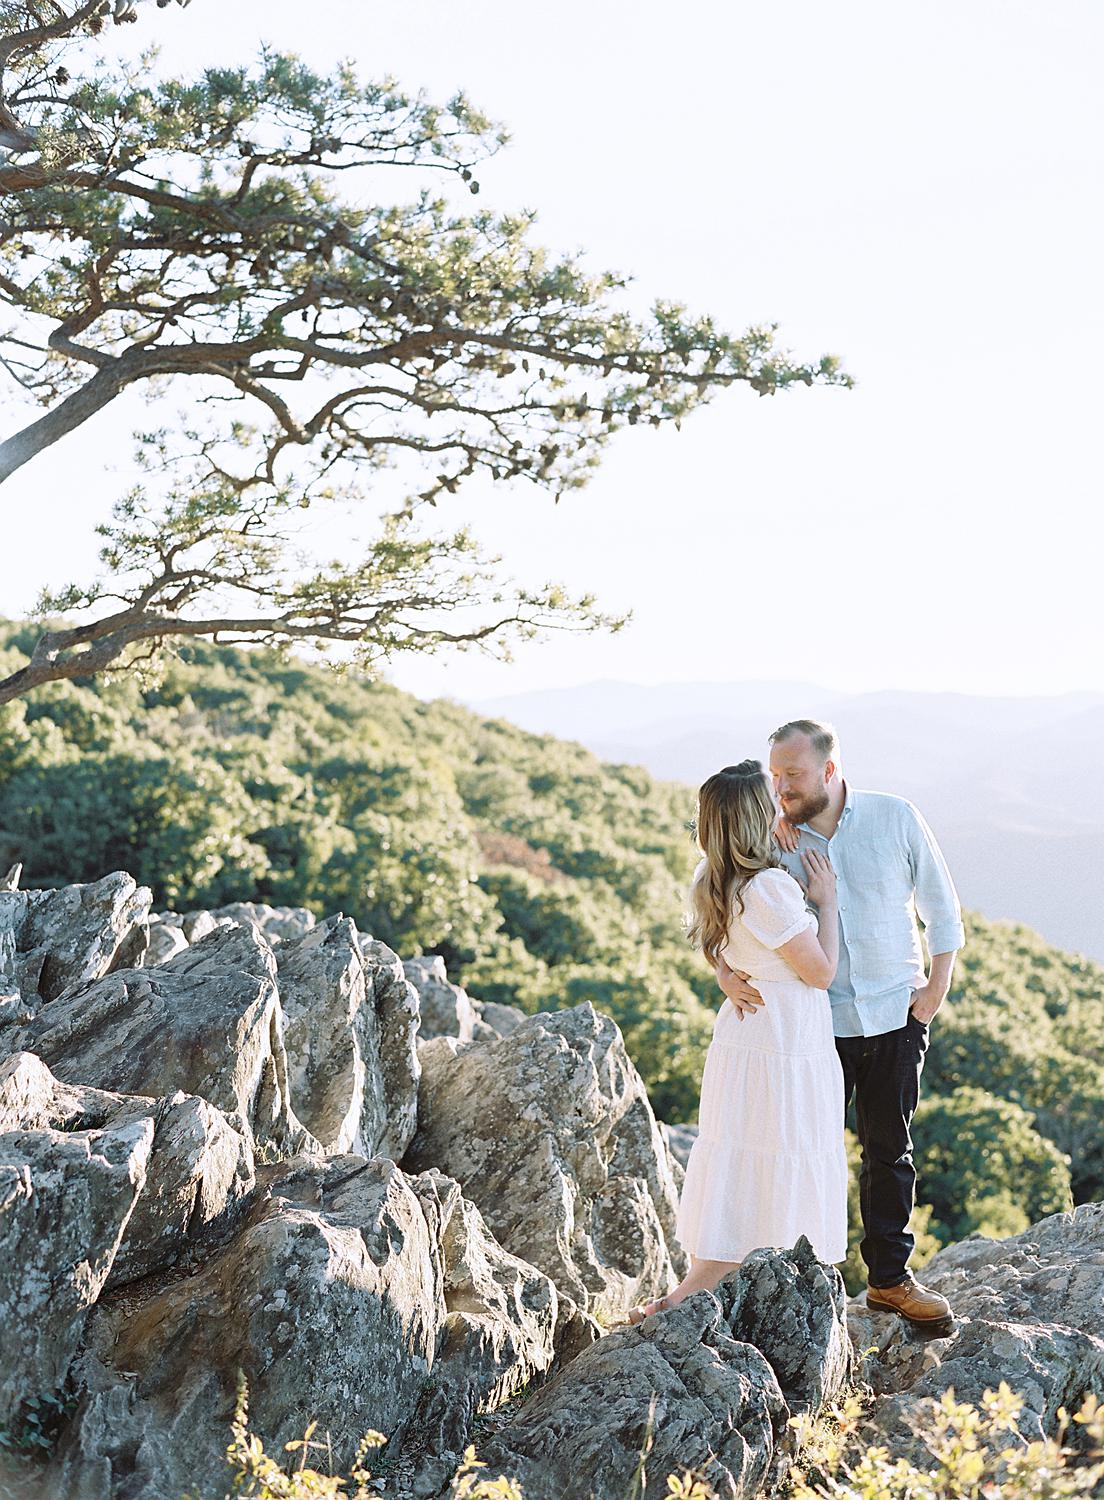 Bride and groom embracing at their Blue Ridge Mountains engagement session atop Ravens Roost.